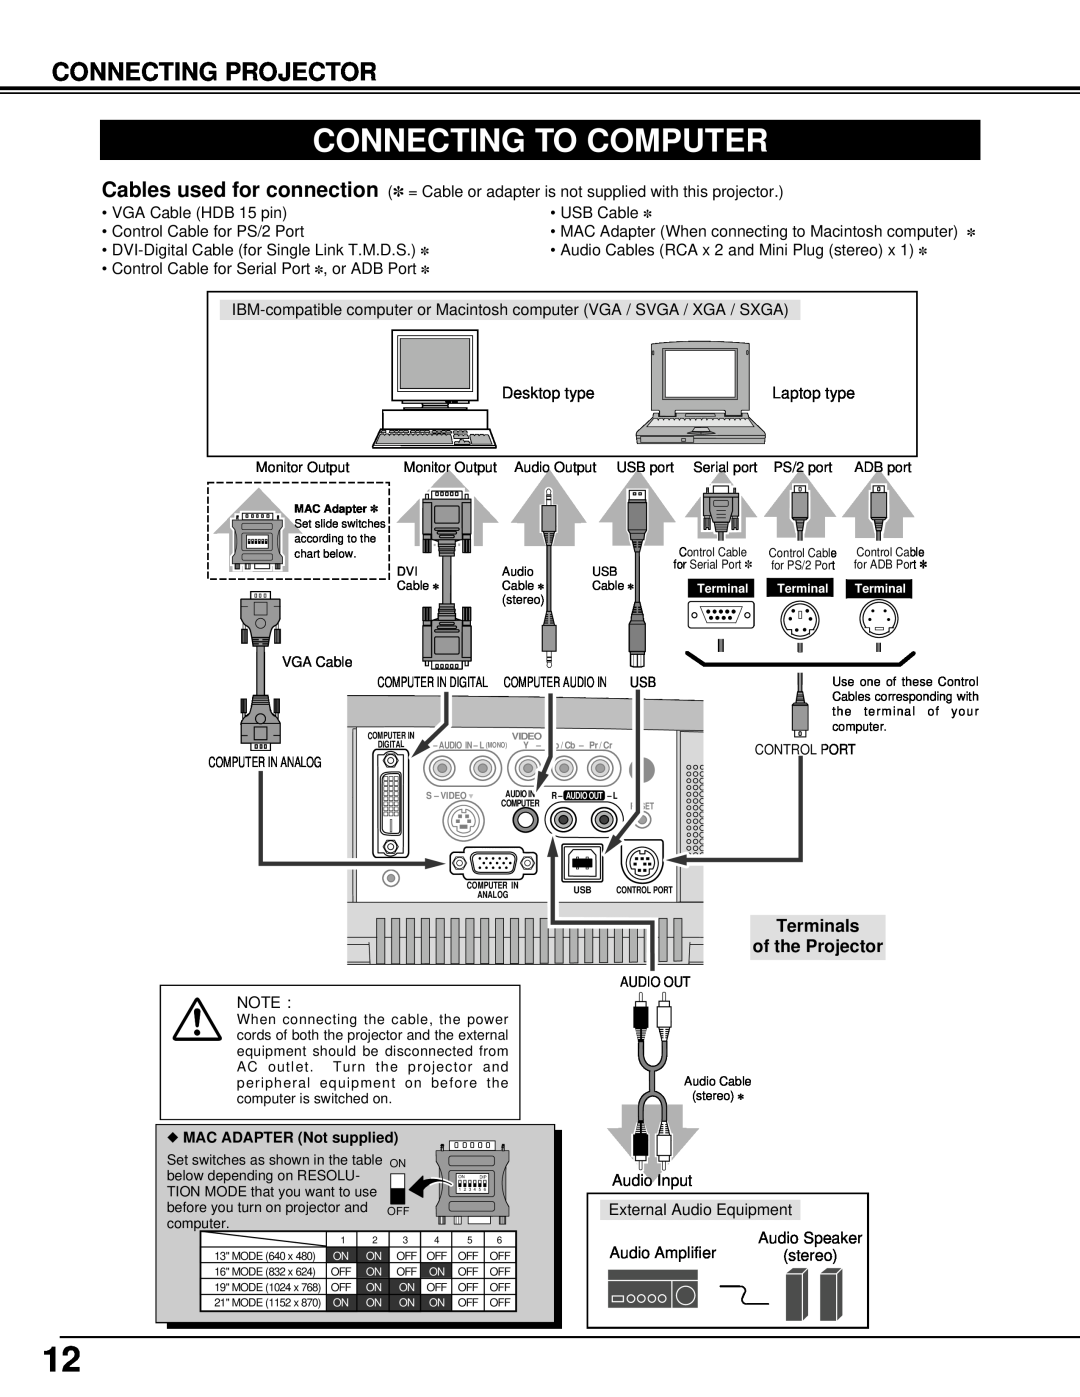 Eiki LC-NB3W owner manual Connecting To Computer, Connecting Projector, Terminals of the Projector 